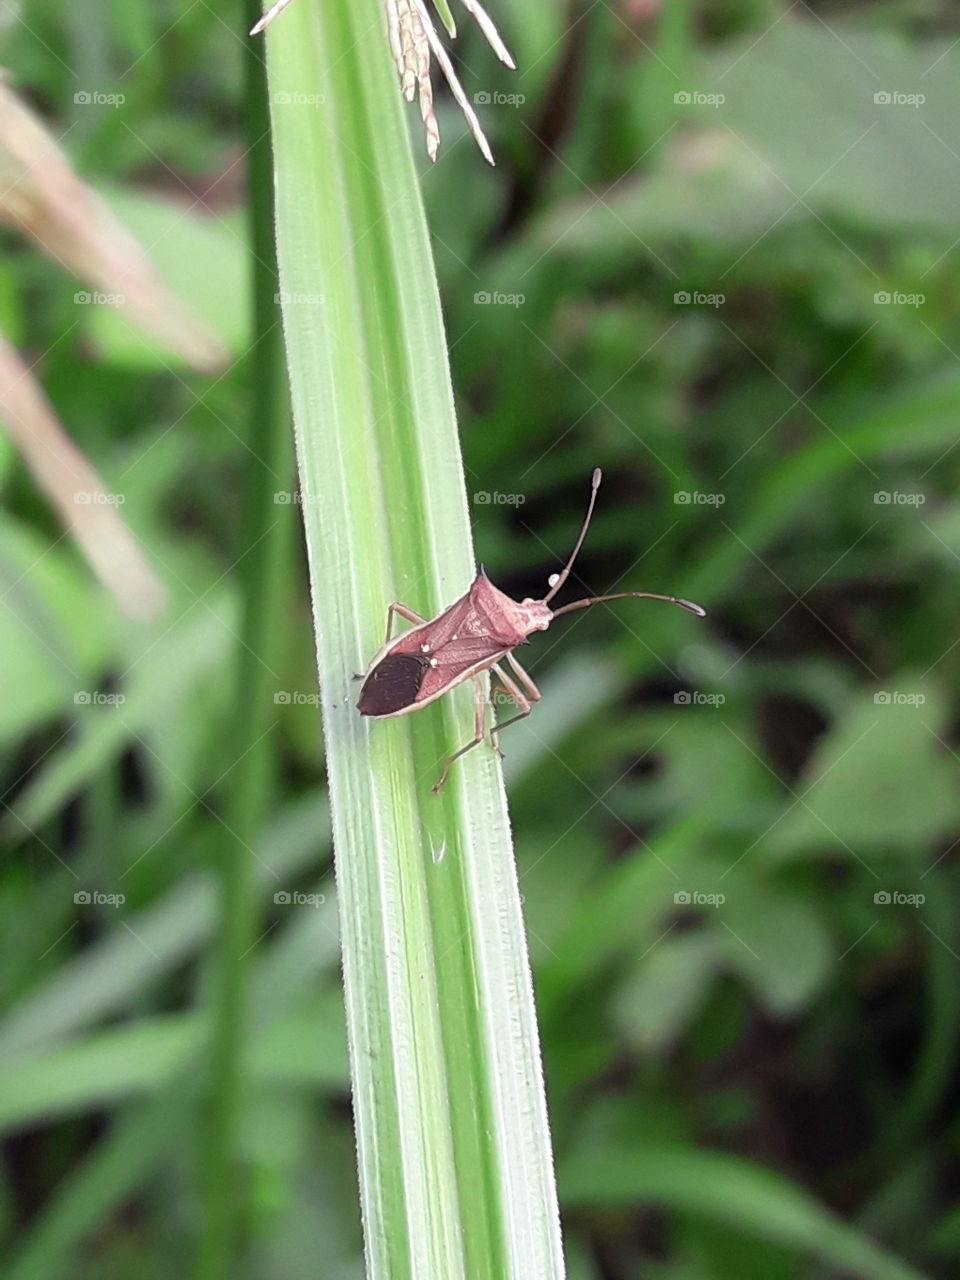 A Insect sitting on a grass leaf